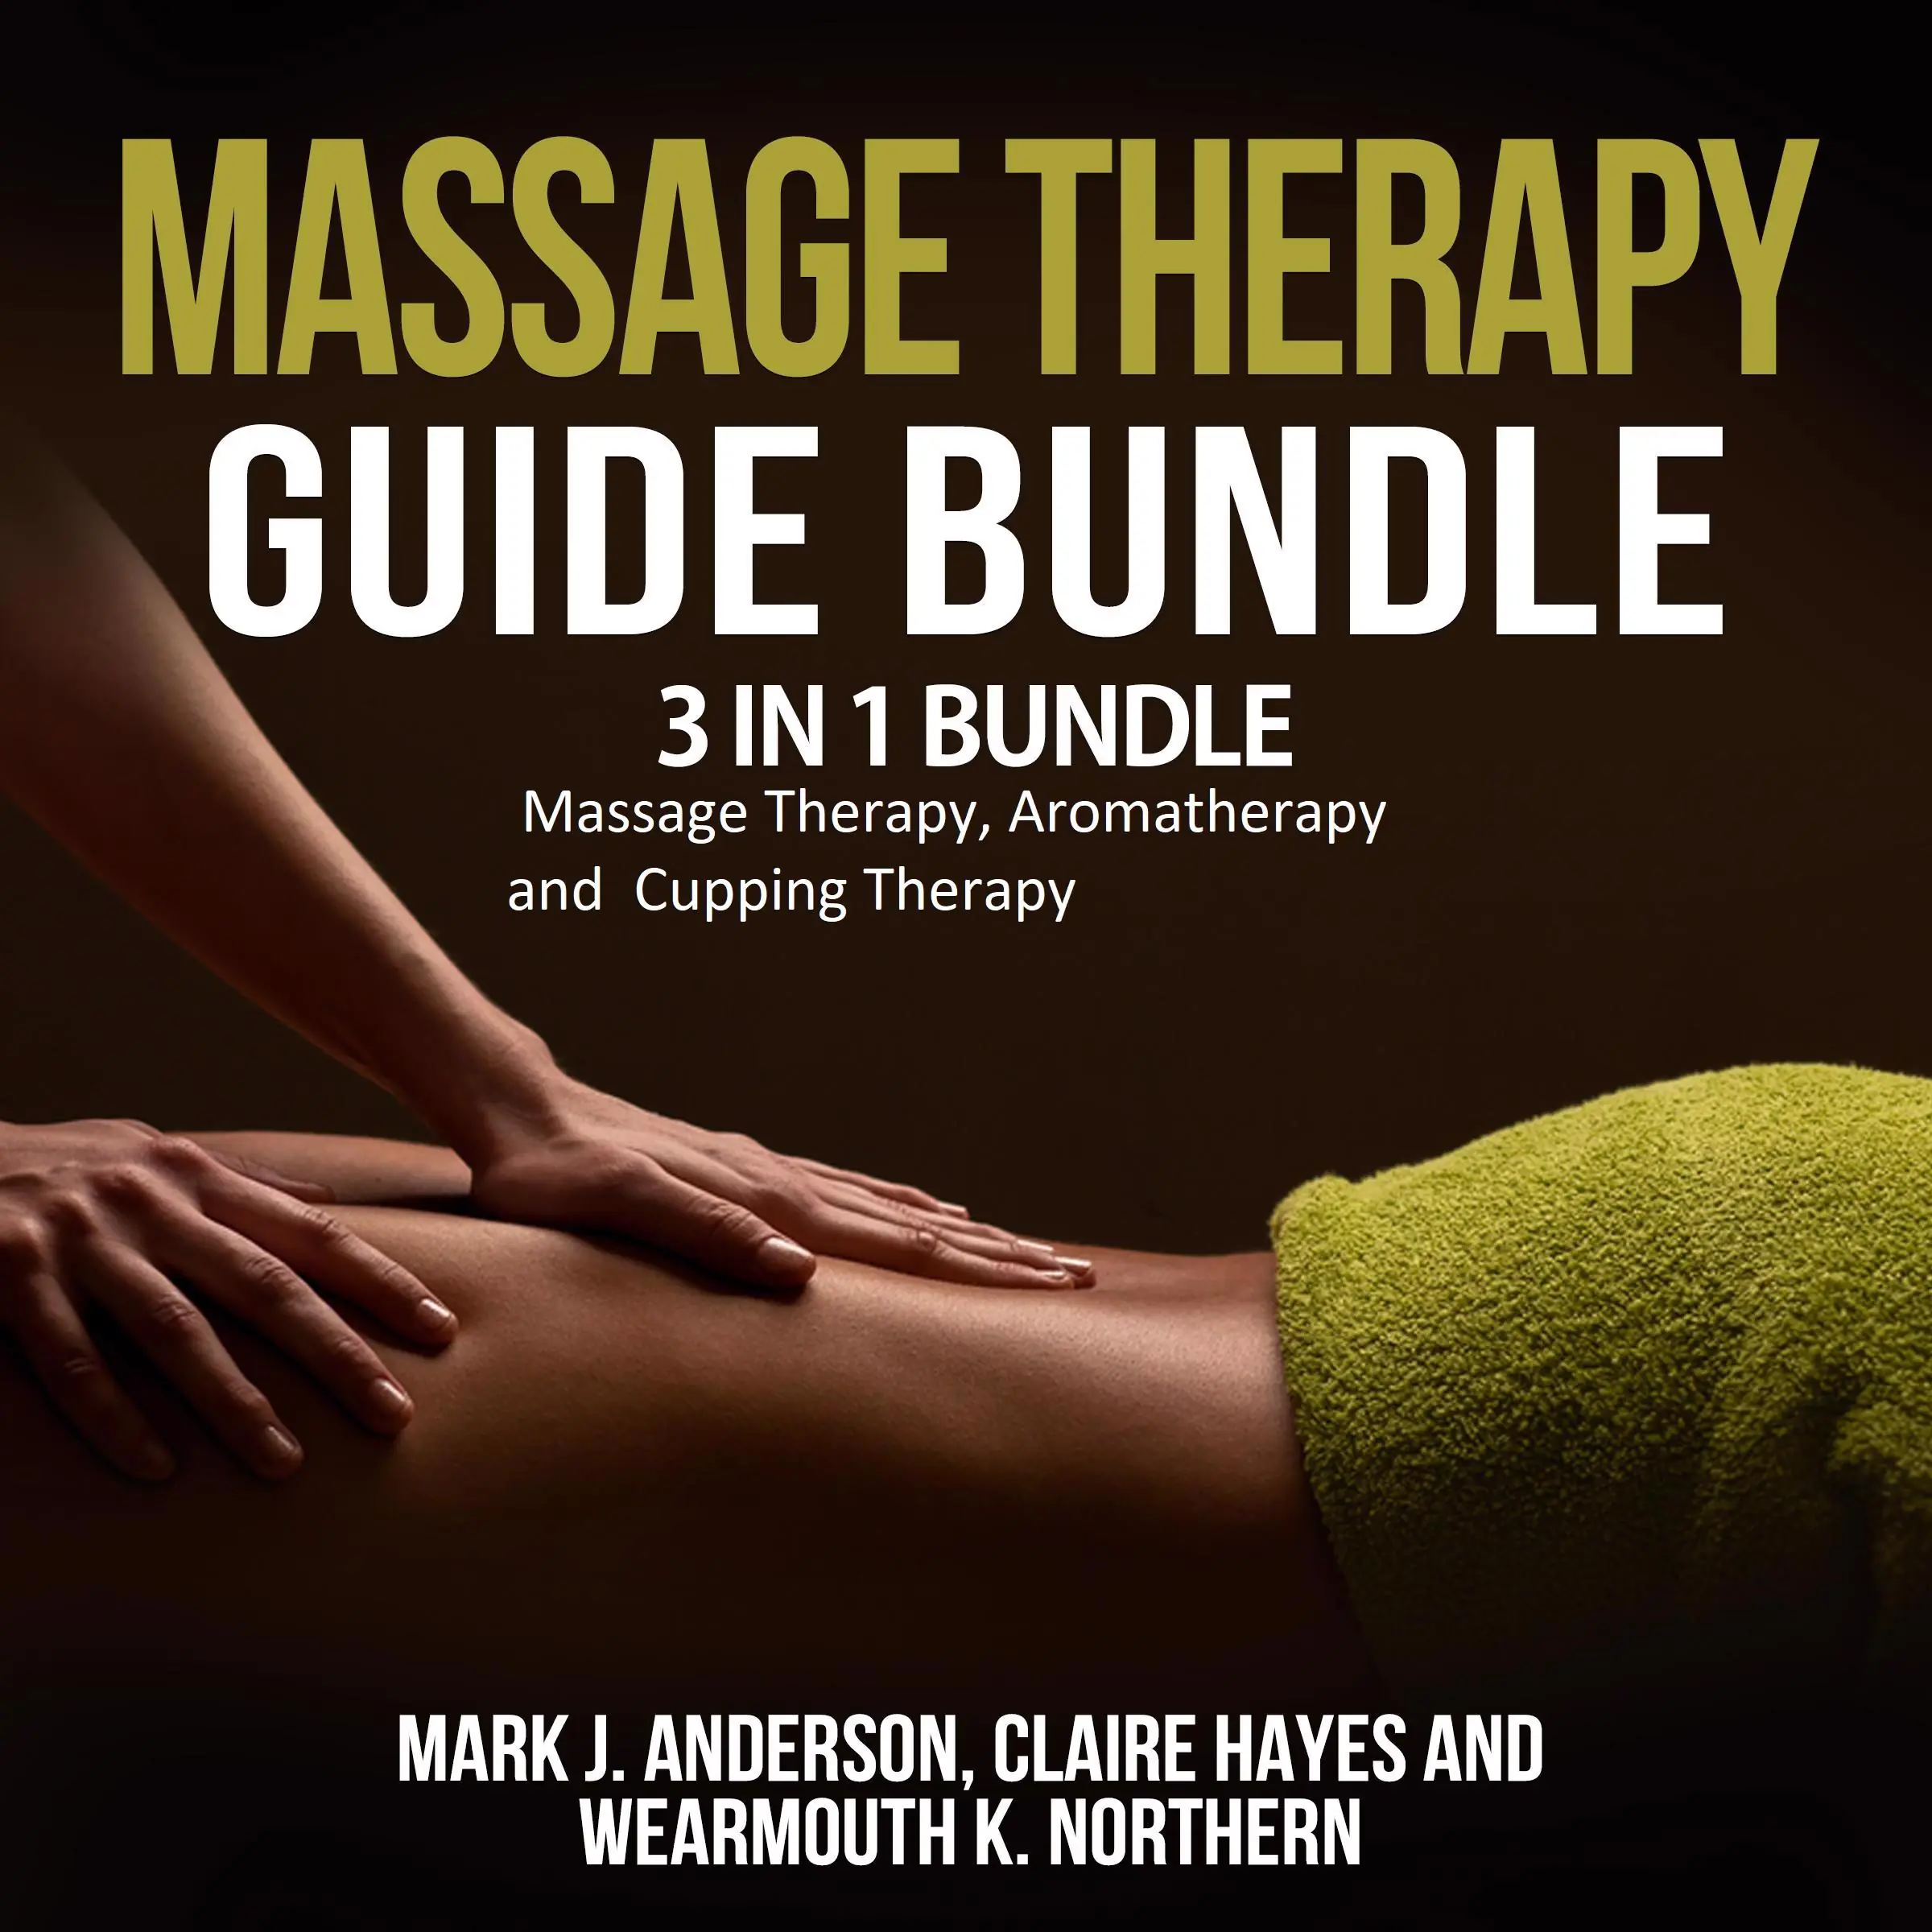 Massage Therapy Guide Bundle: 3 in 1 Bundle, Massage Therapy, Aromatherapy, Cupping Therapy Audiobook by Claire Hayes and Wearmouth K. Northern